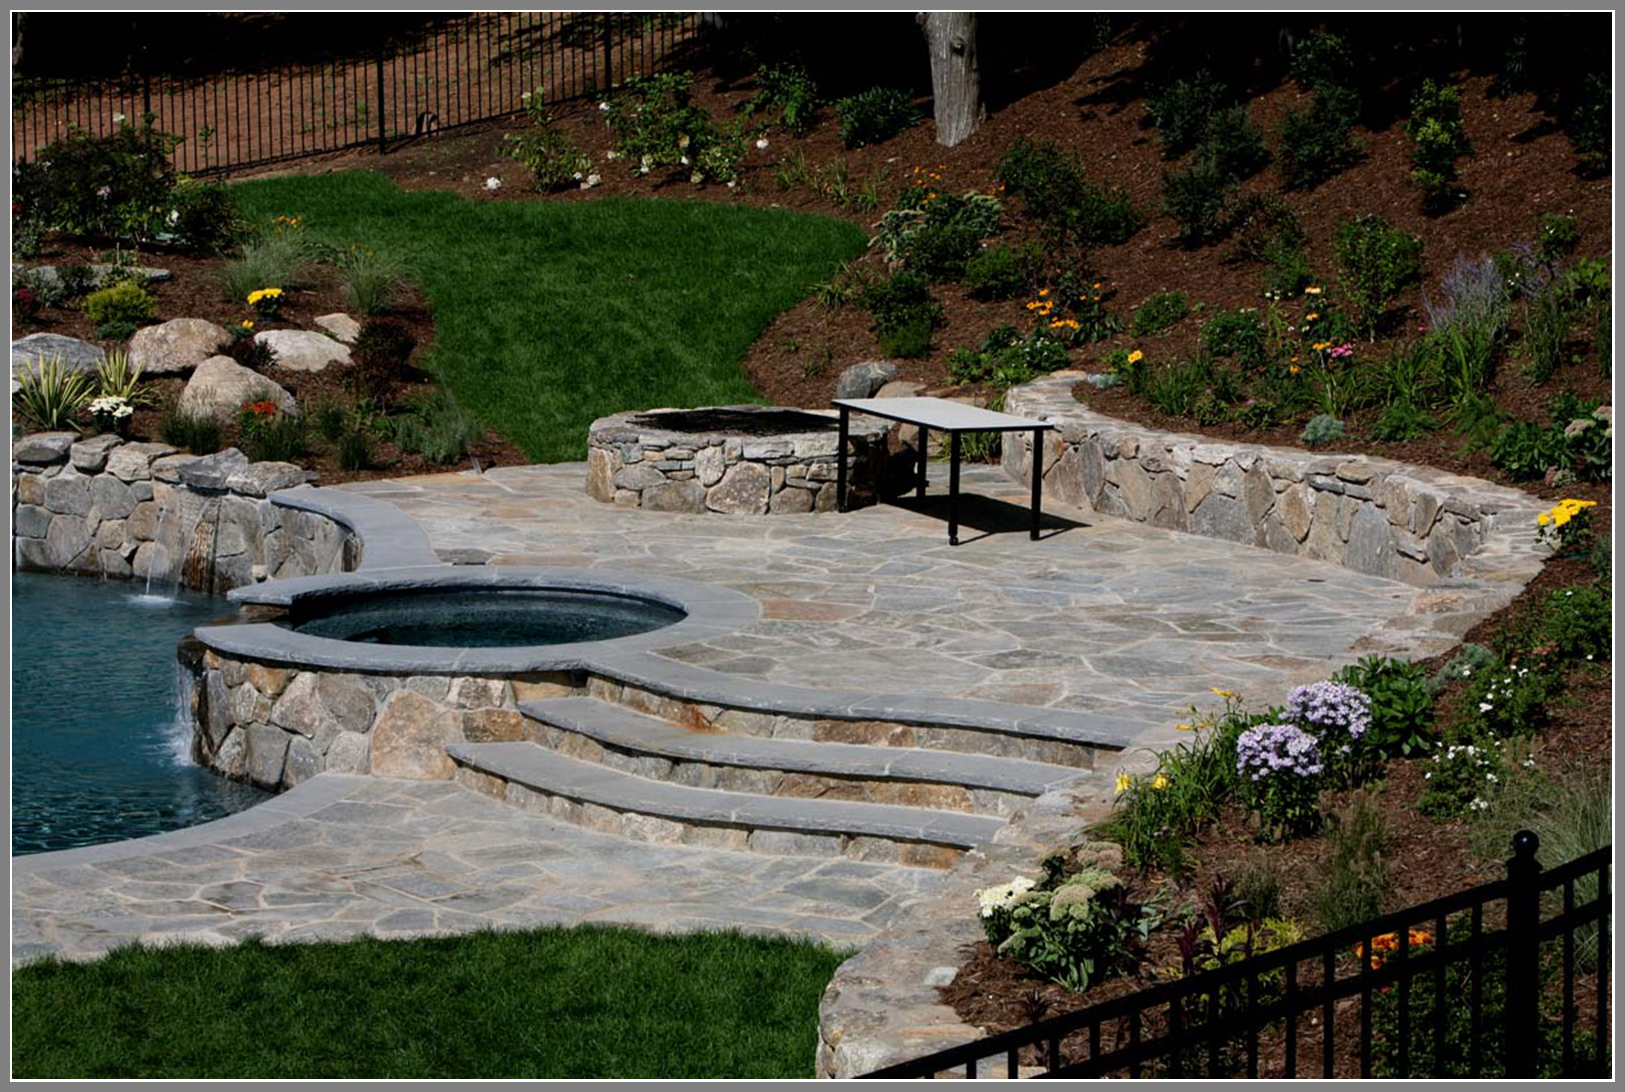 Flagstone pool deck and stone wall